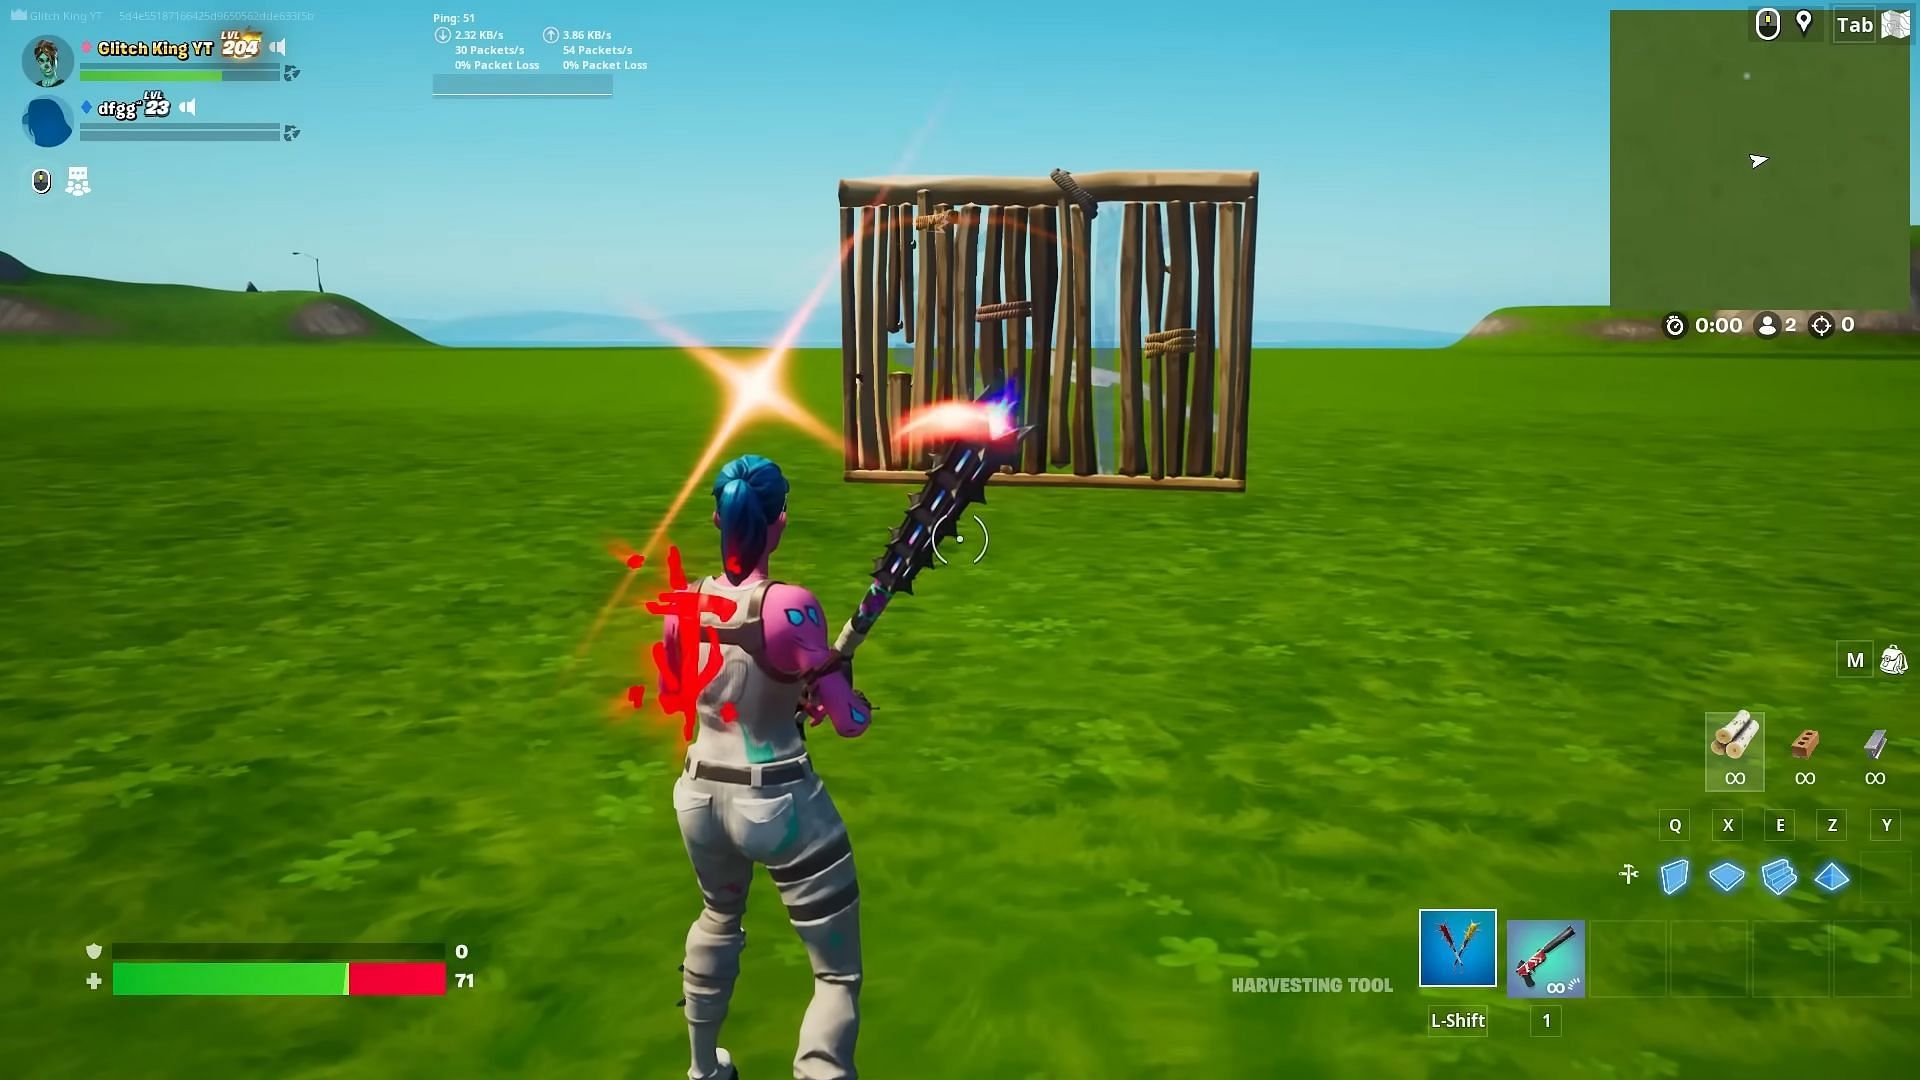 The Fortnite weapon can be used to hit enemies through builds (Image via Epic Games)